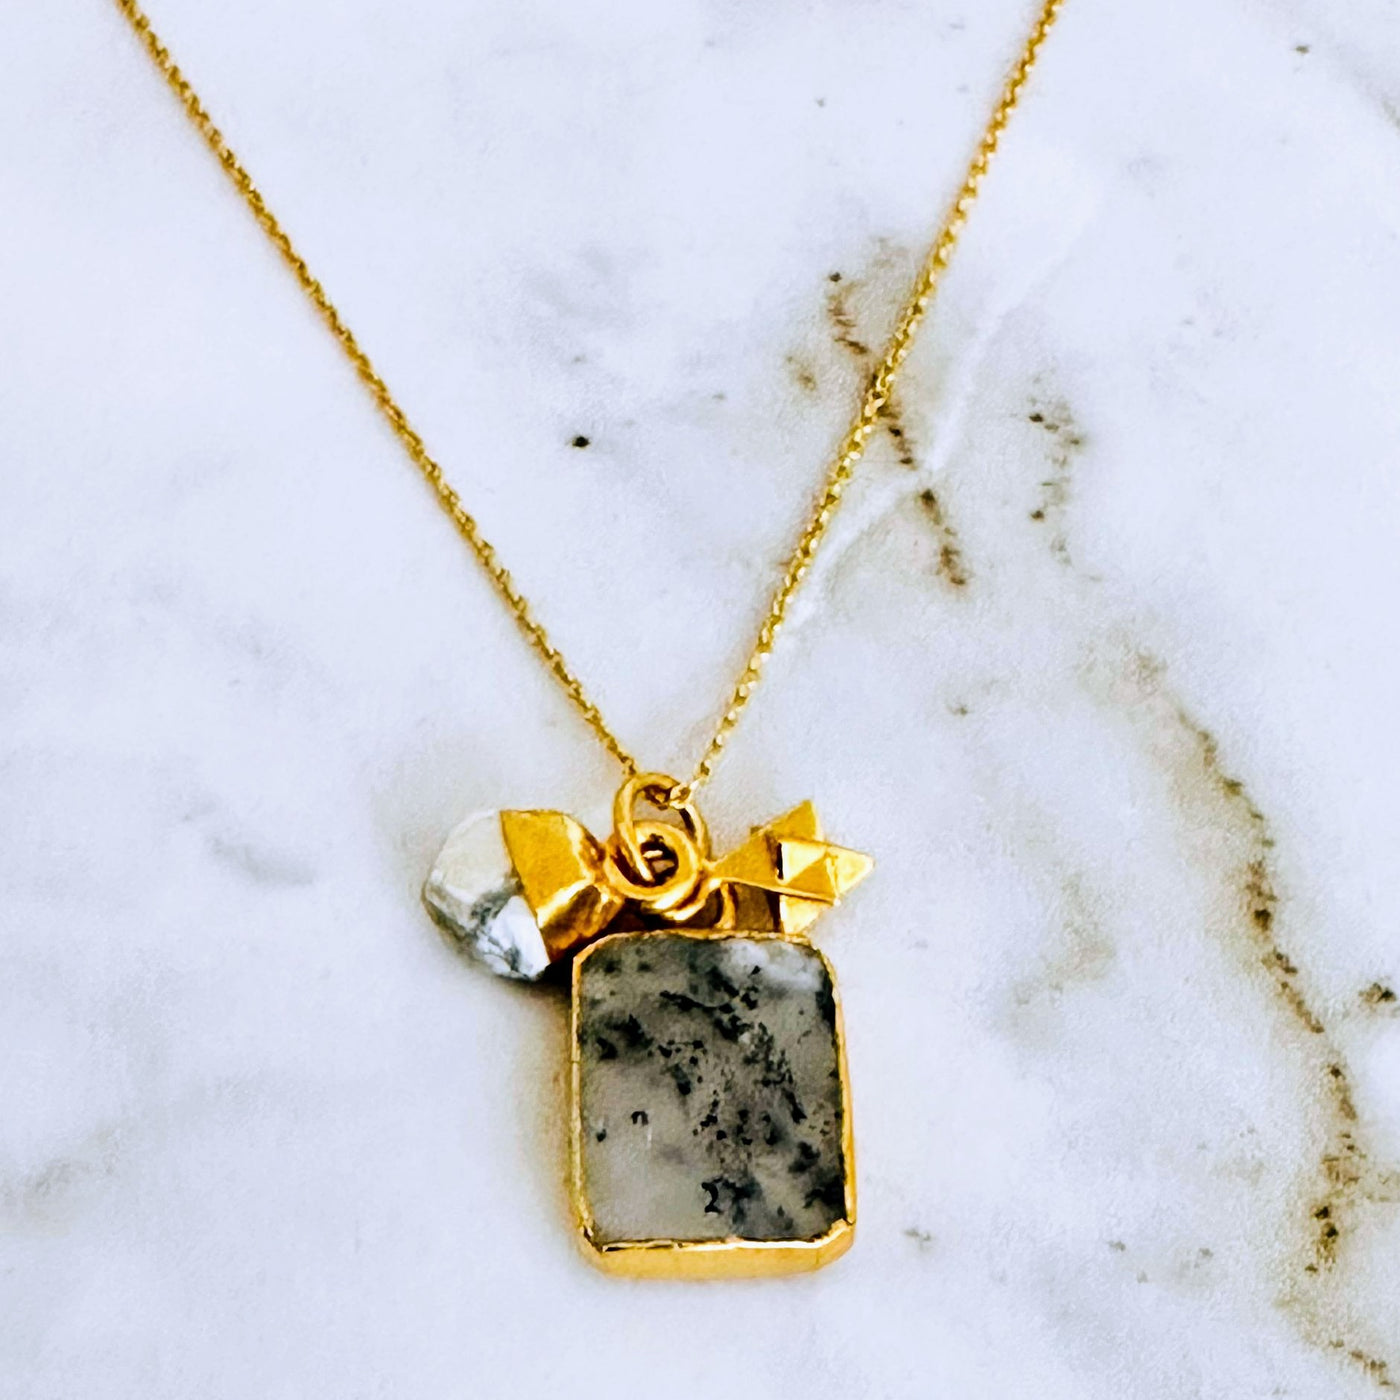 Gold plated dendritic agate, white howlite and tetrahedron charm pendant necklace